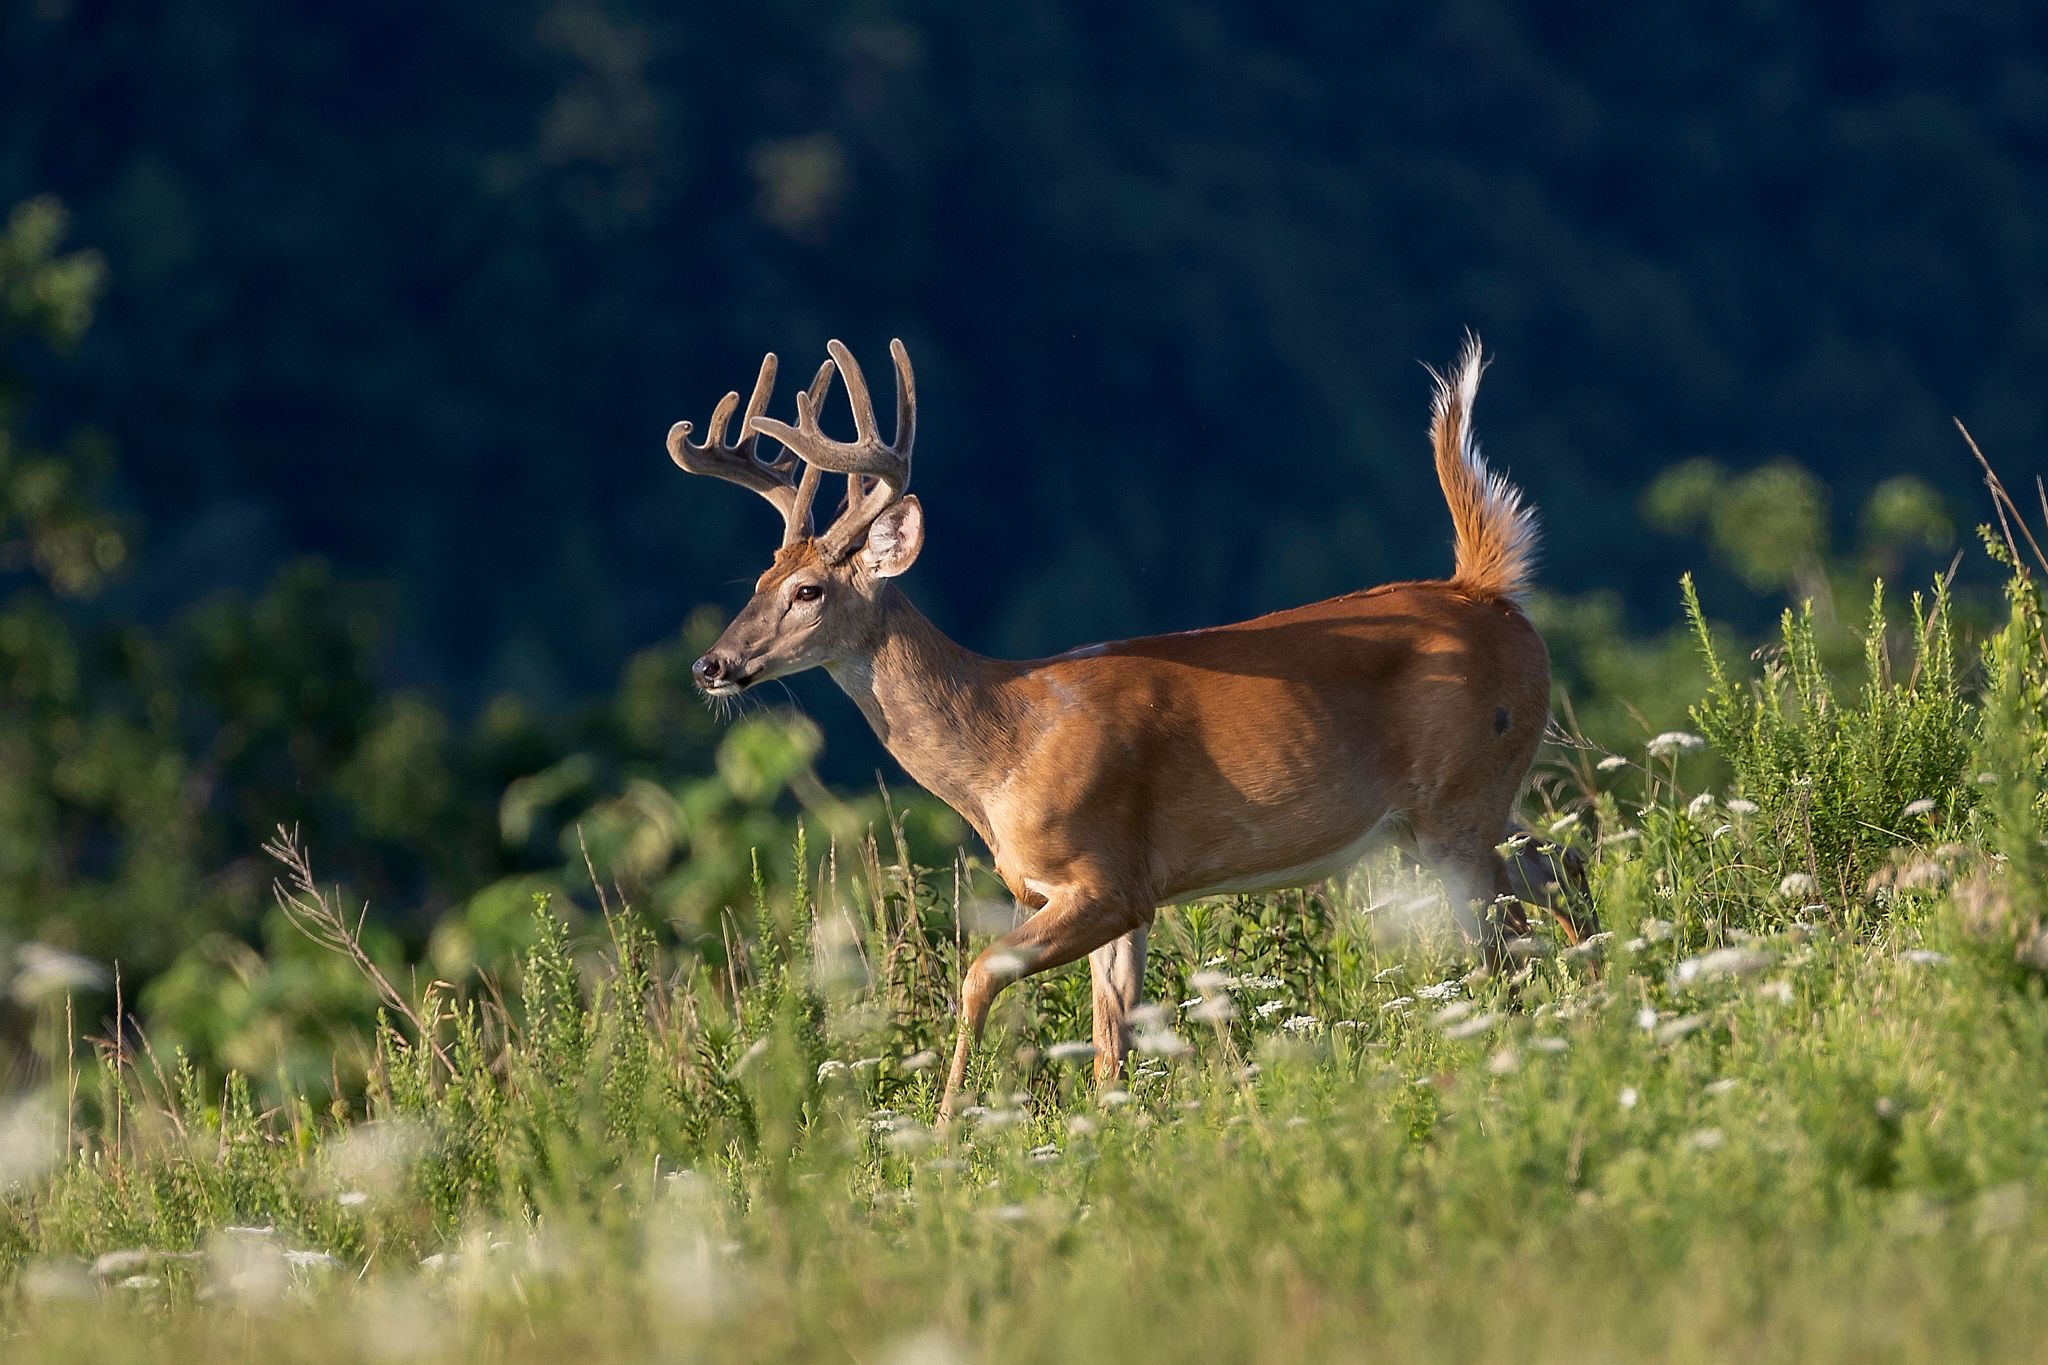 An image of a deer moving through a grassy field. 